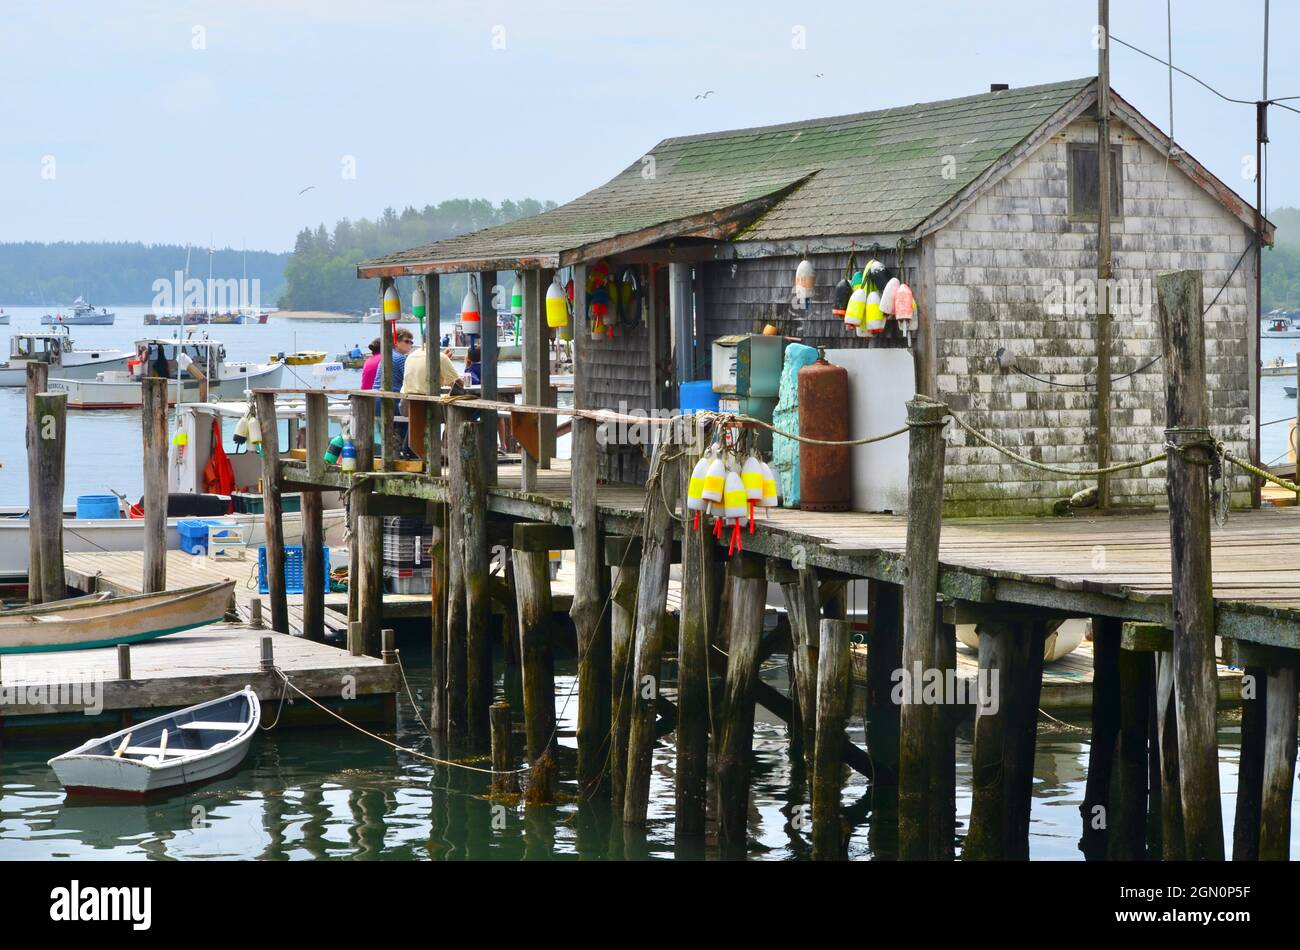 Colorful lobster buoys spruce up a weathered shack on a dock in a working harbor in coastal Maine. Copy space. Stock Photo